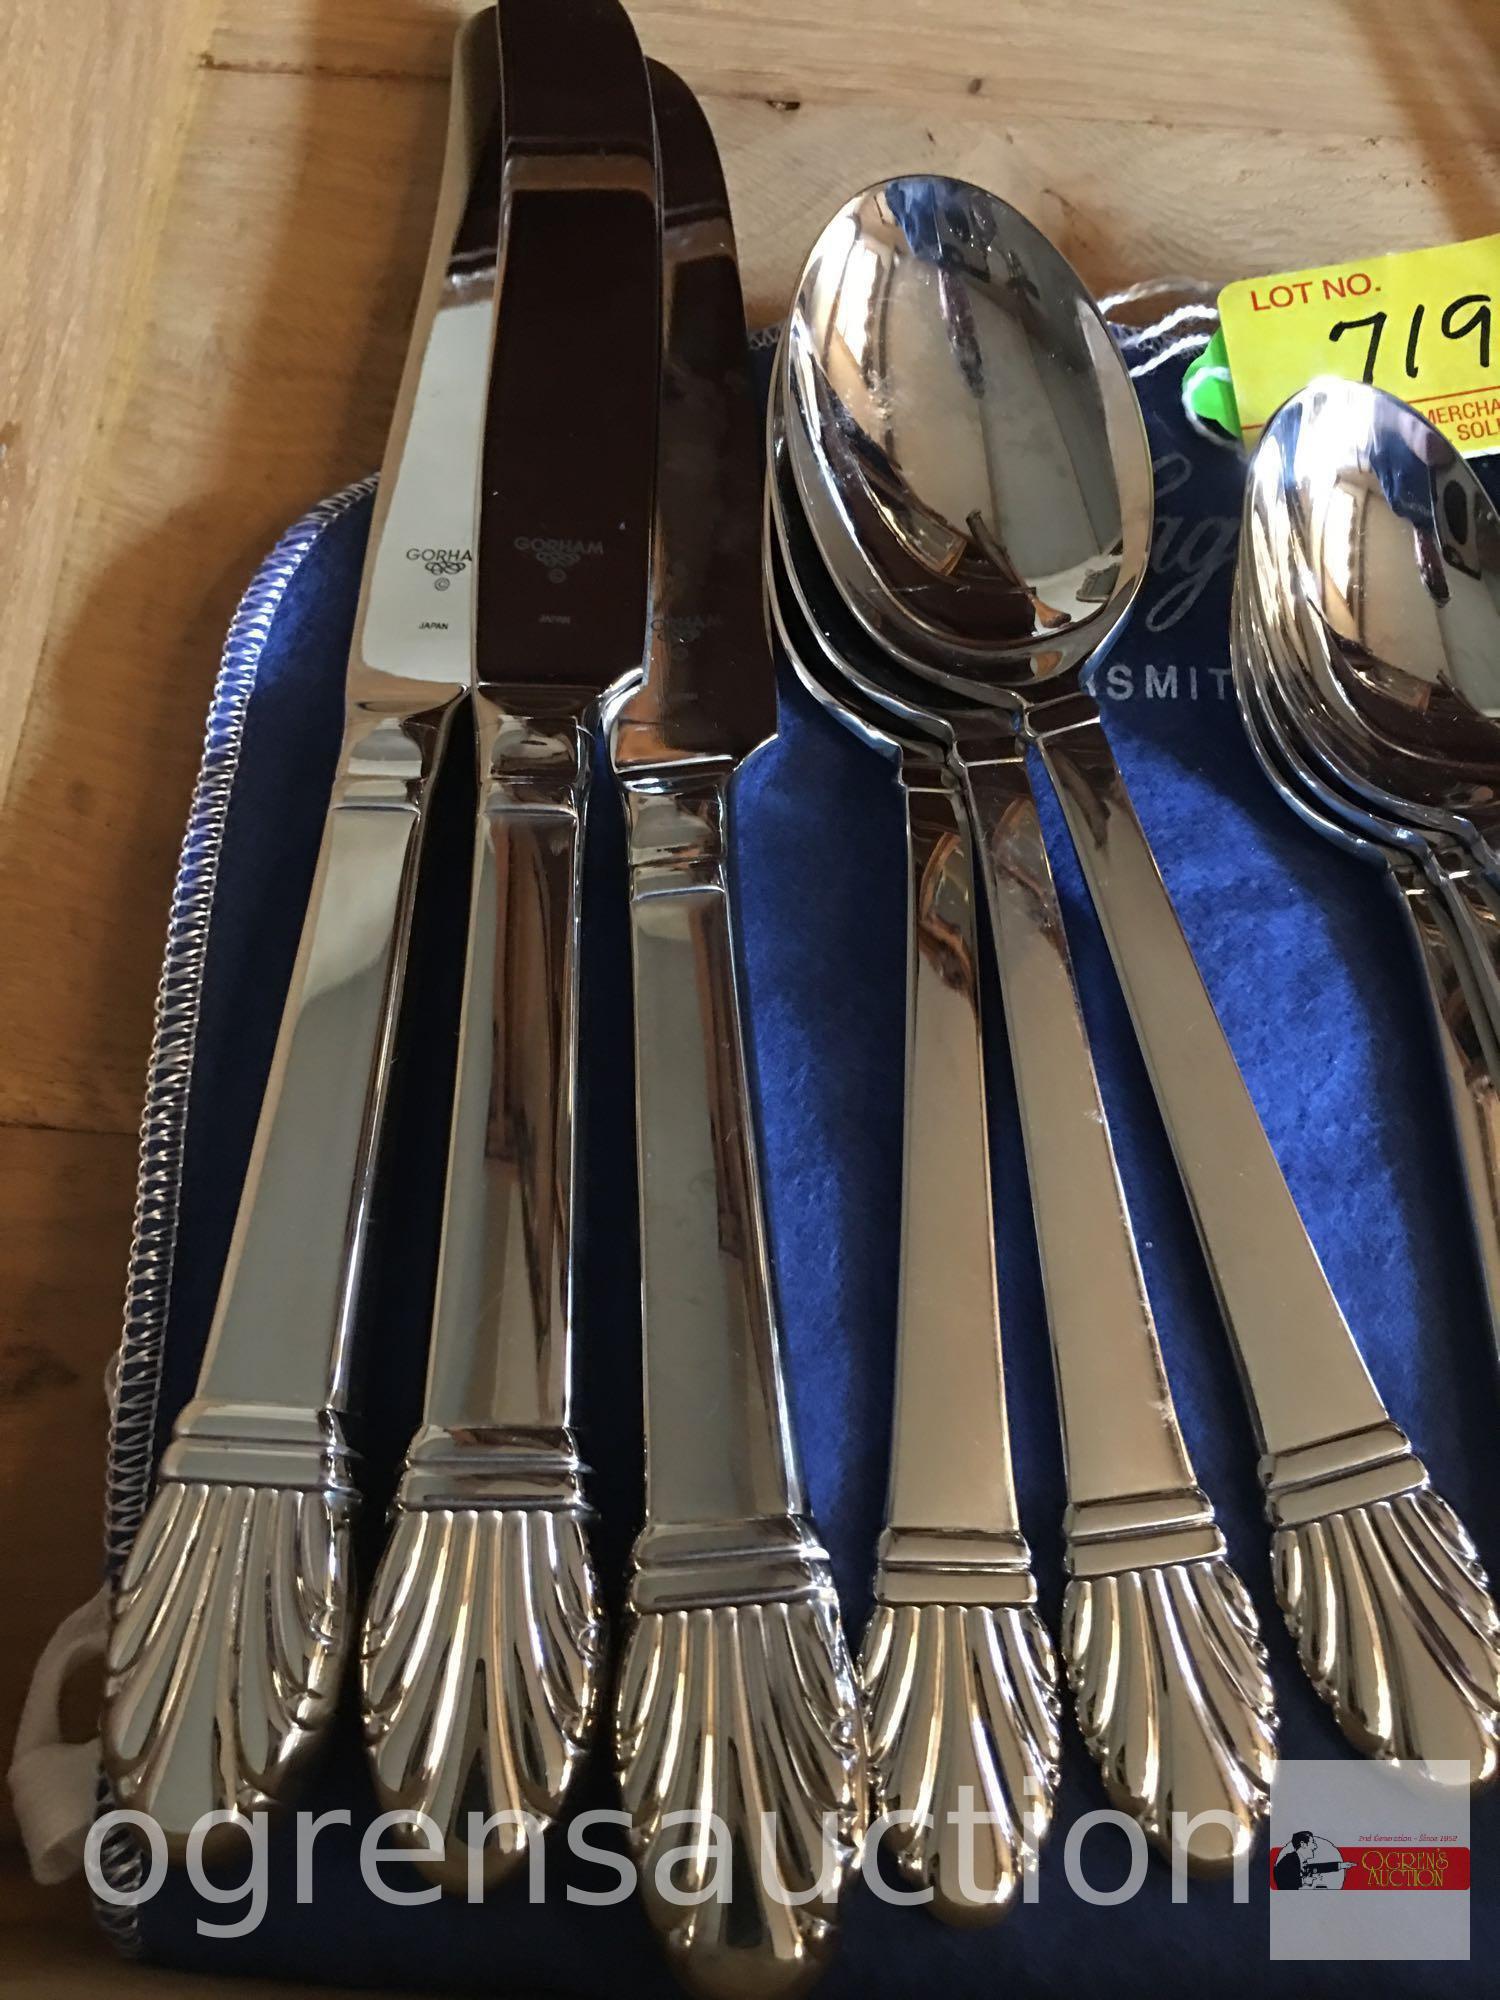 Flatware - Gorham stainless 18/8 - 15pc. - 3-5pc. place settings